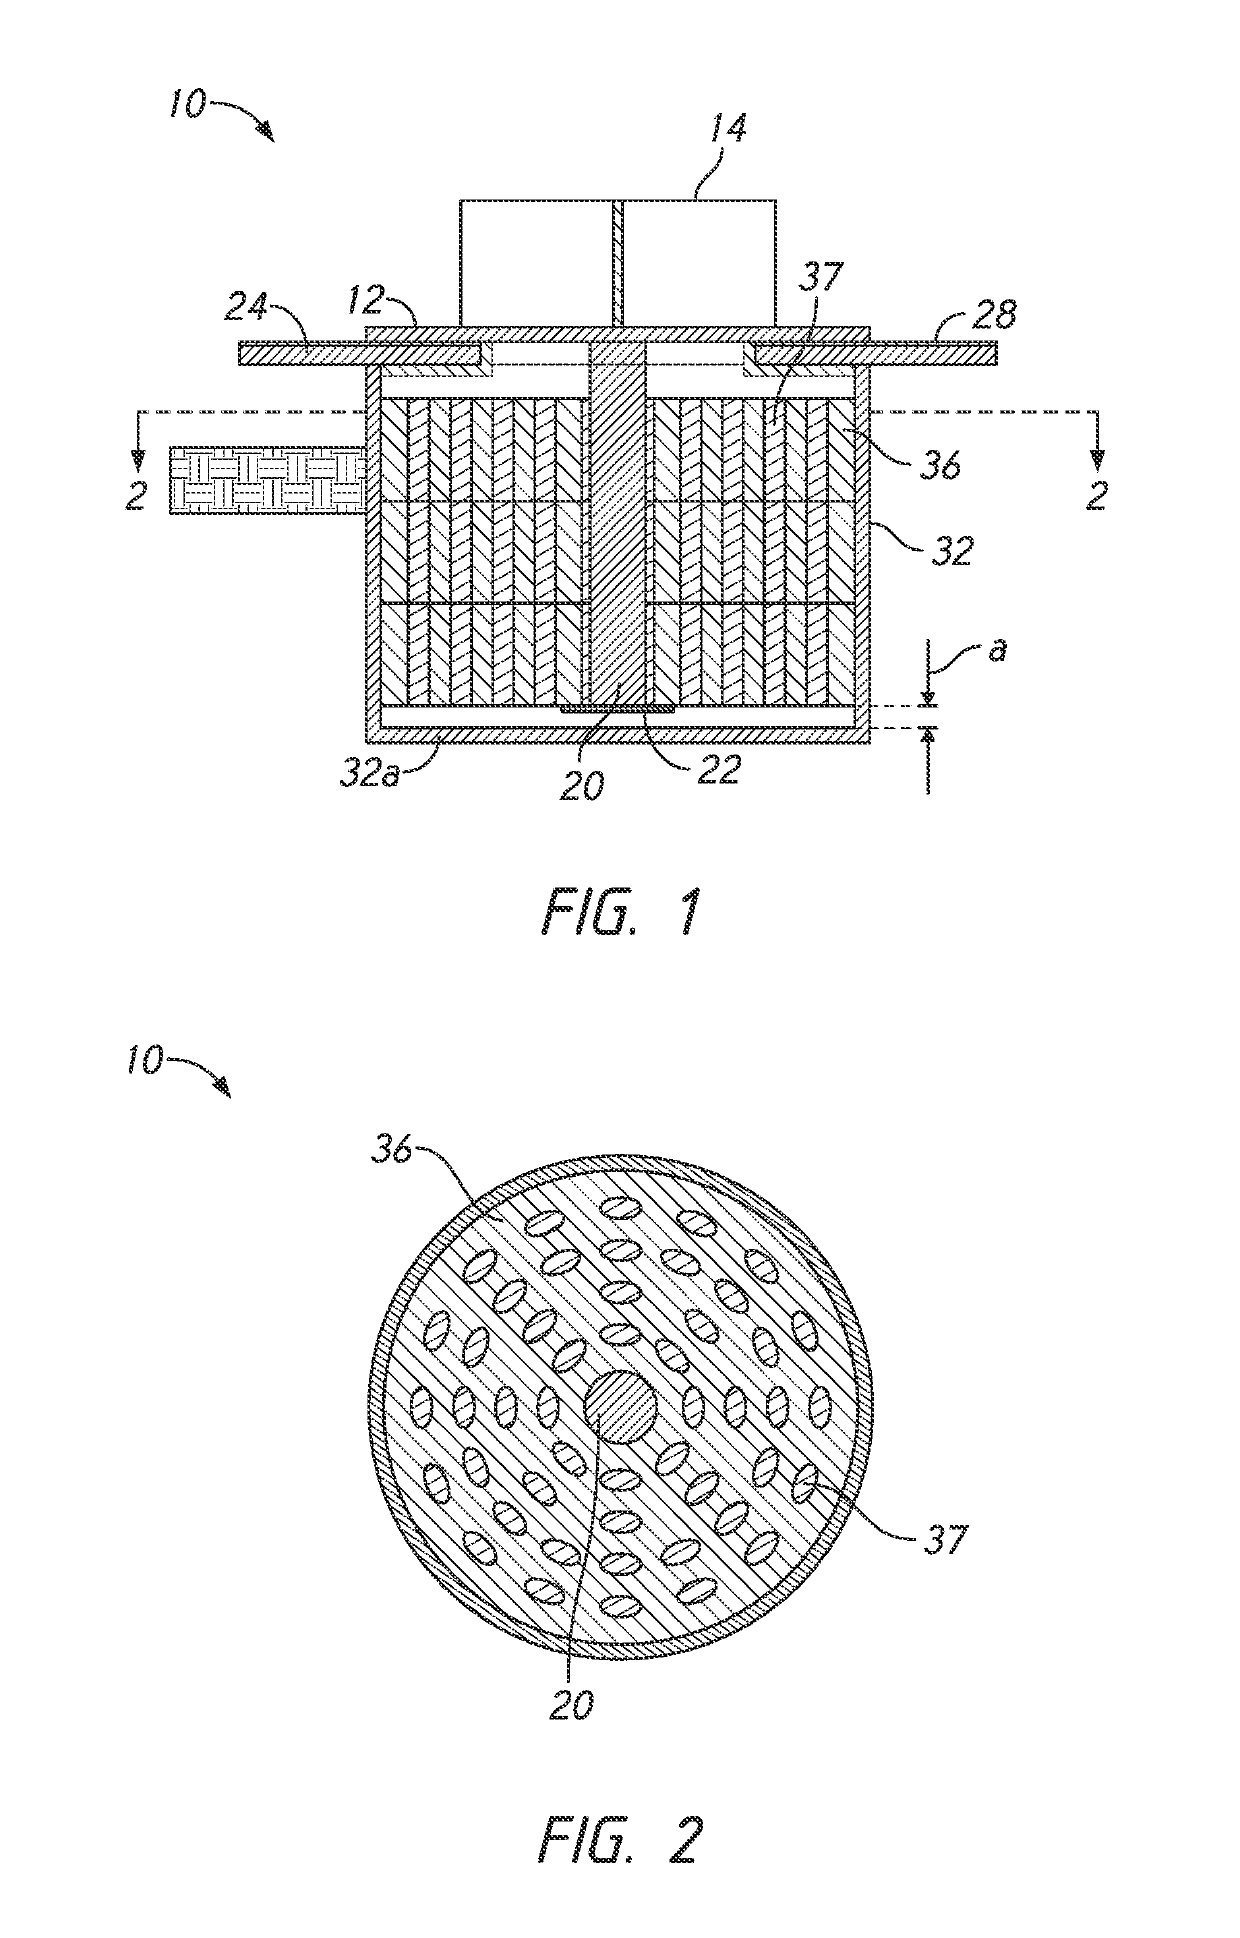 Seismic isolator and damping device